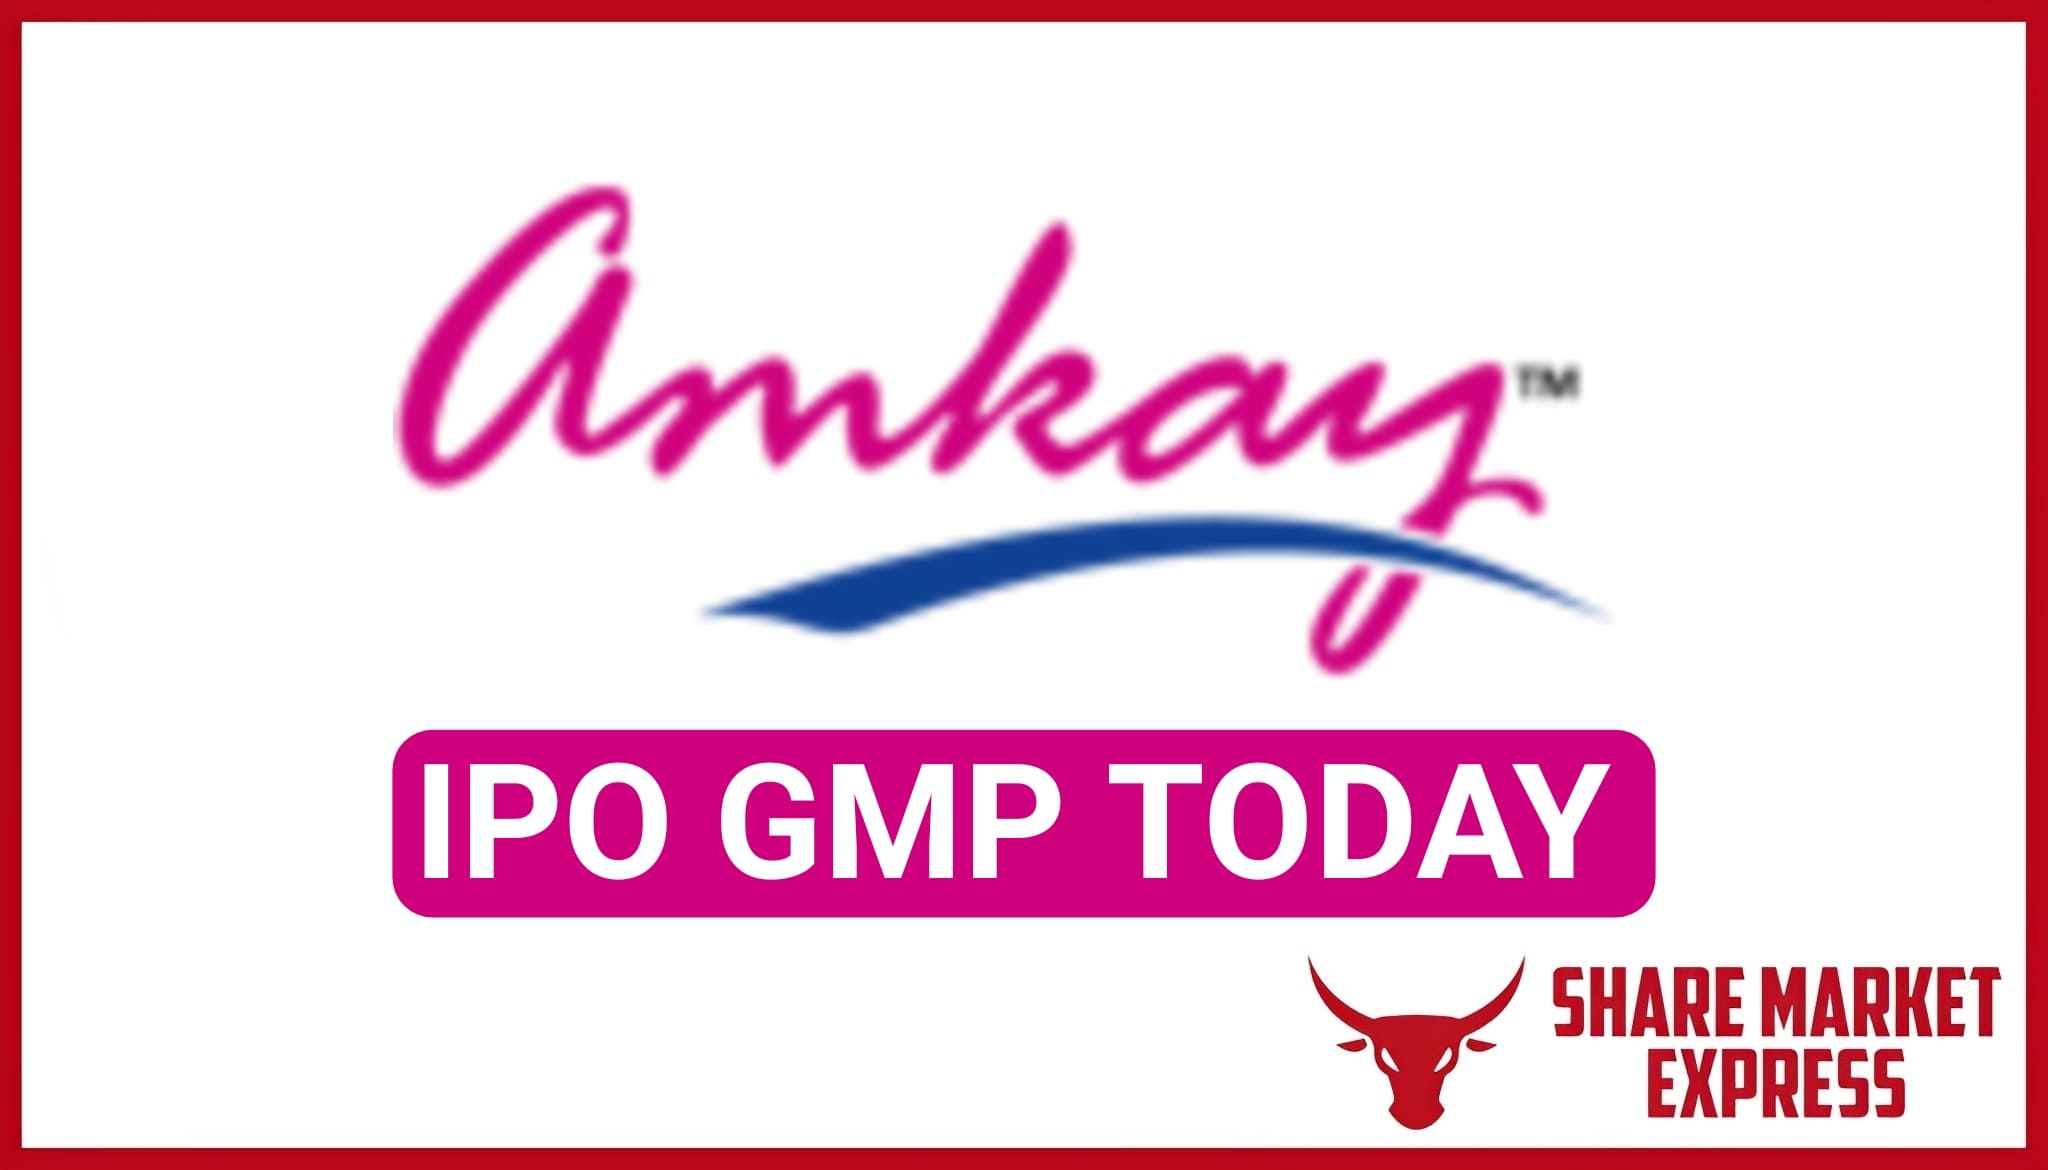 Amkay Products IPO GMP Today